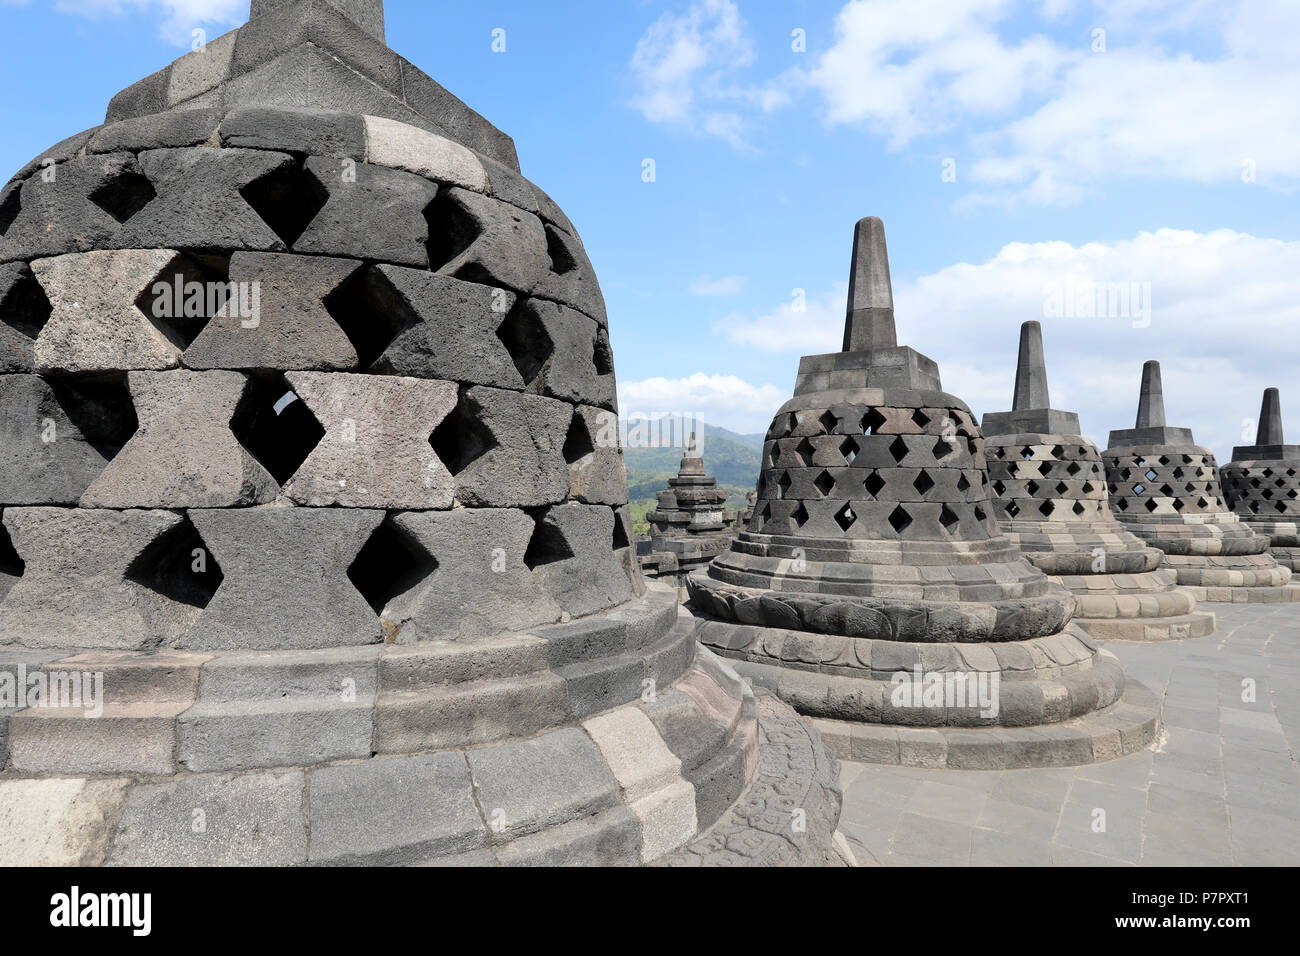 Borobudur, Indonesia - June 23, 2018: Perforated stupas – each containing a statue of Buddha – on the upper level of the Buddhist temple of Borobudur, Stock Photo